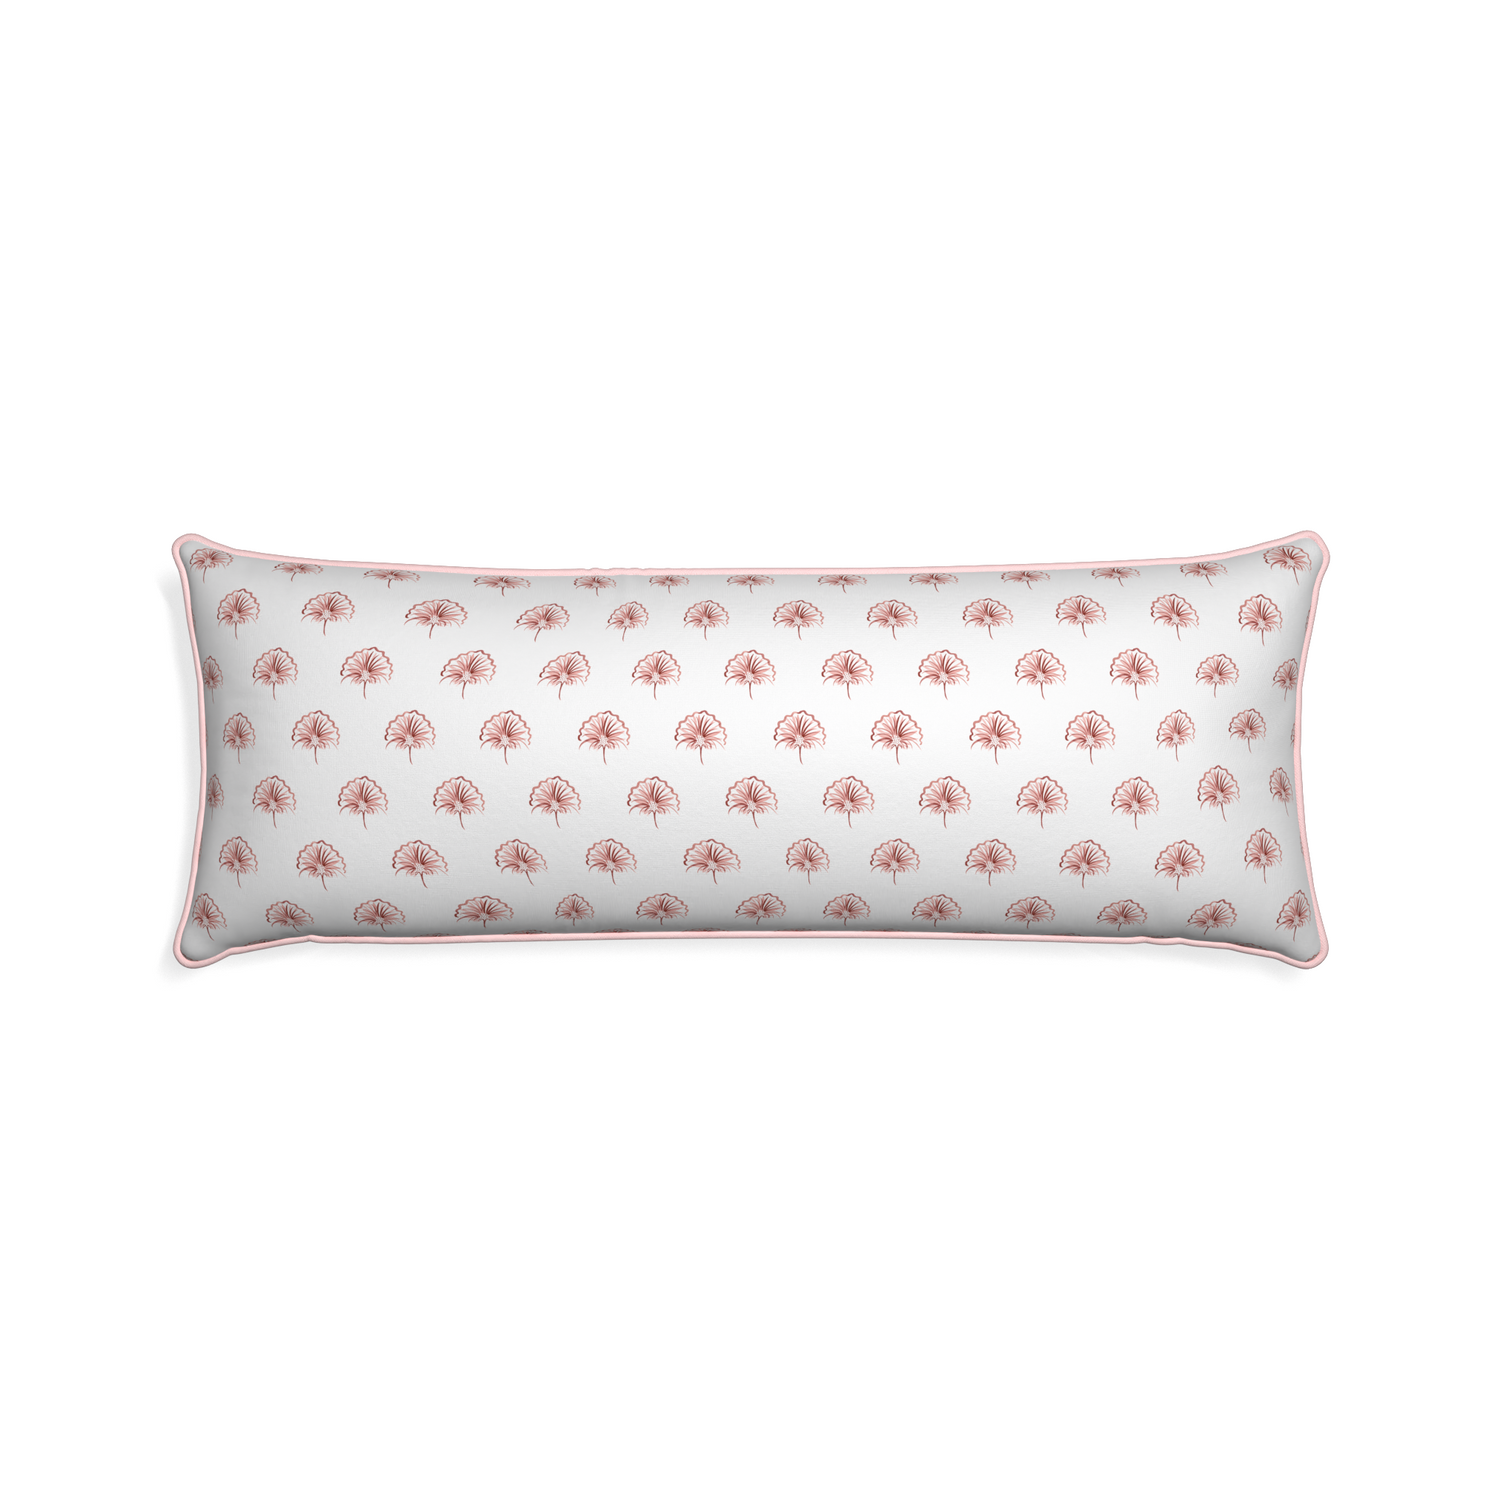 Xl-lumbar penelope rose custom pillow with petal piping on white background